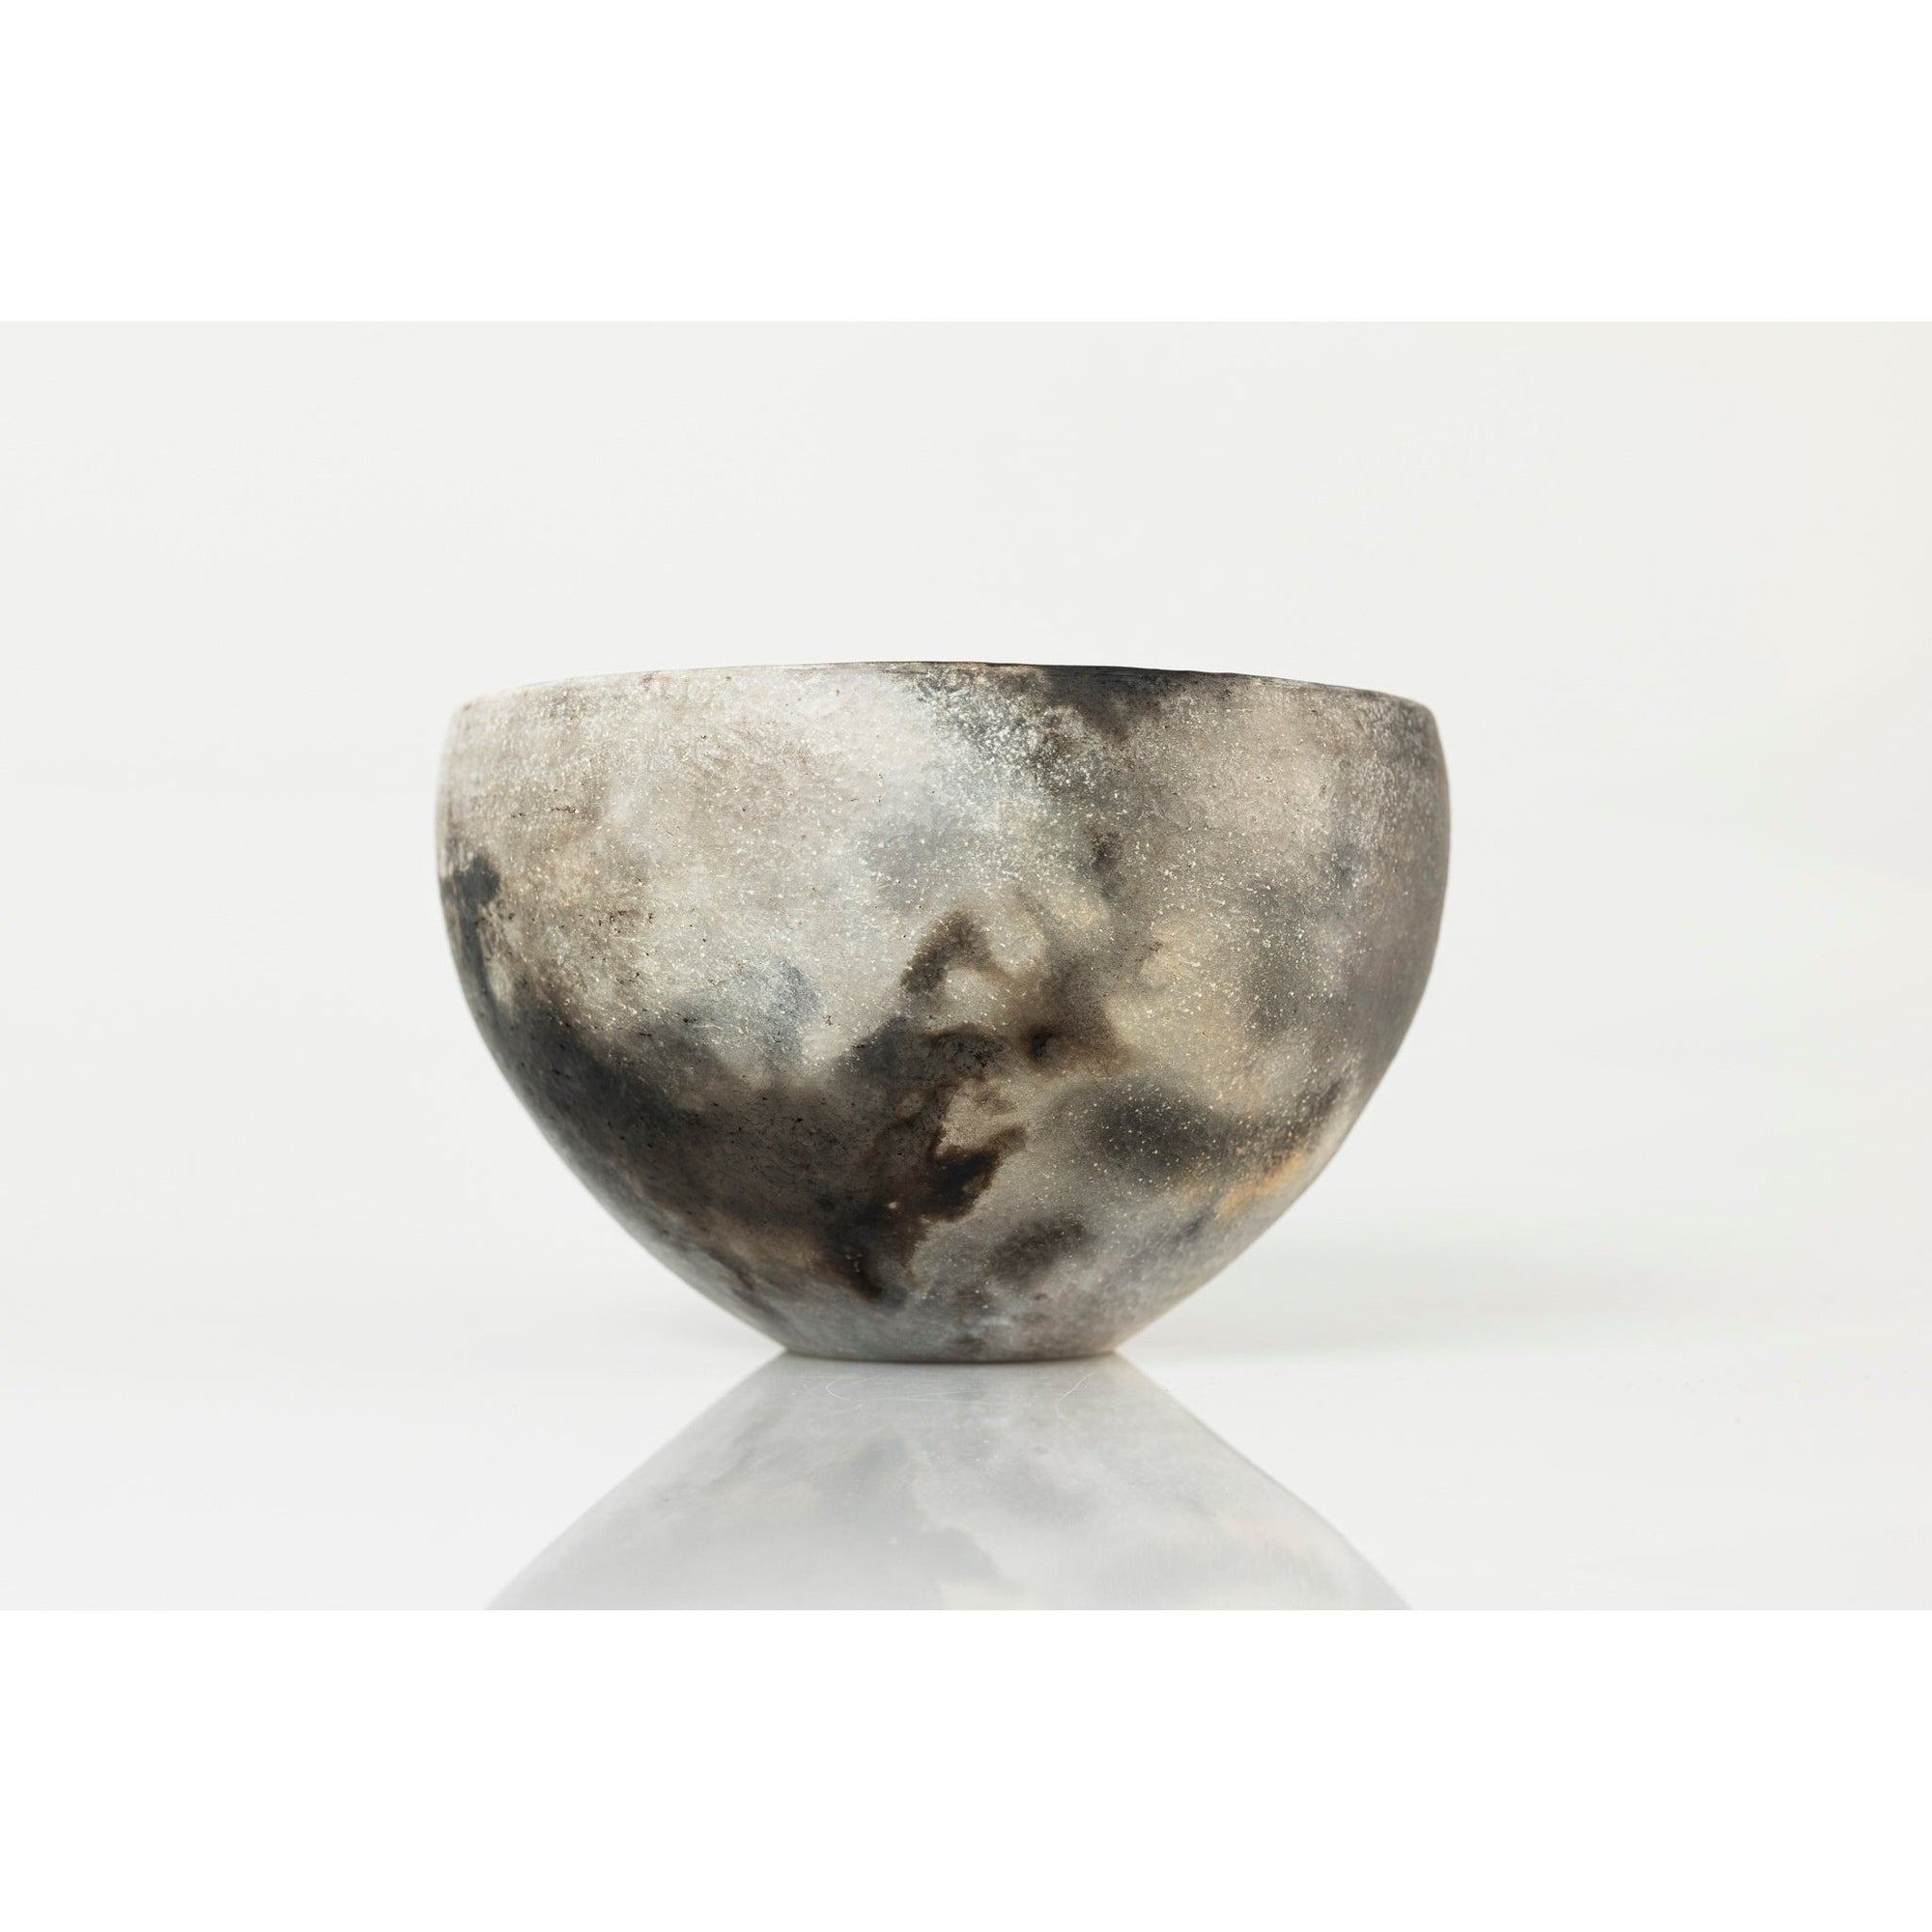 'BJ30 Small Bowl' by Bridget Johnson ceramics available at Padstow Gallery, Cornwall